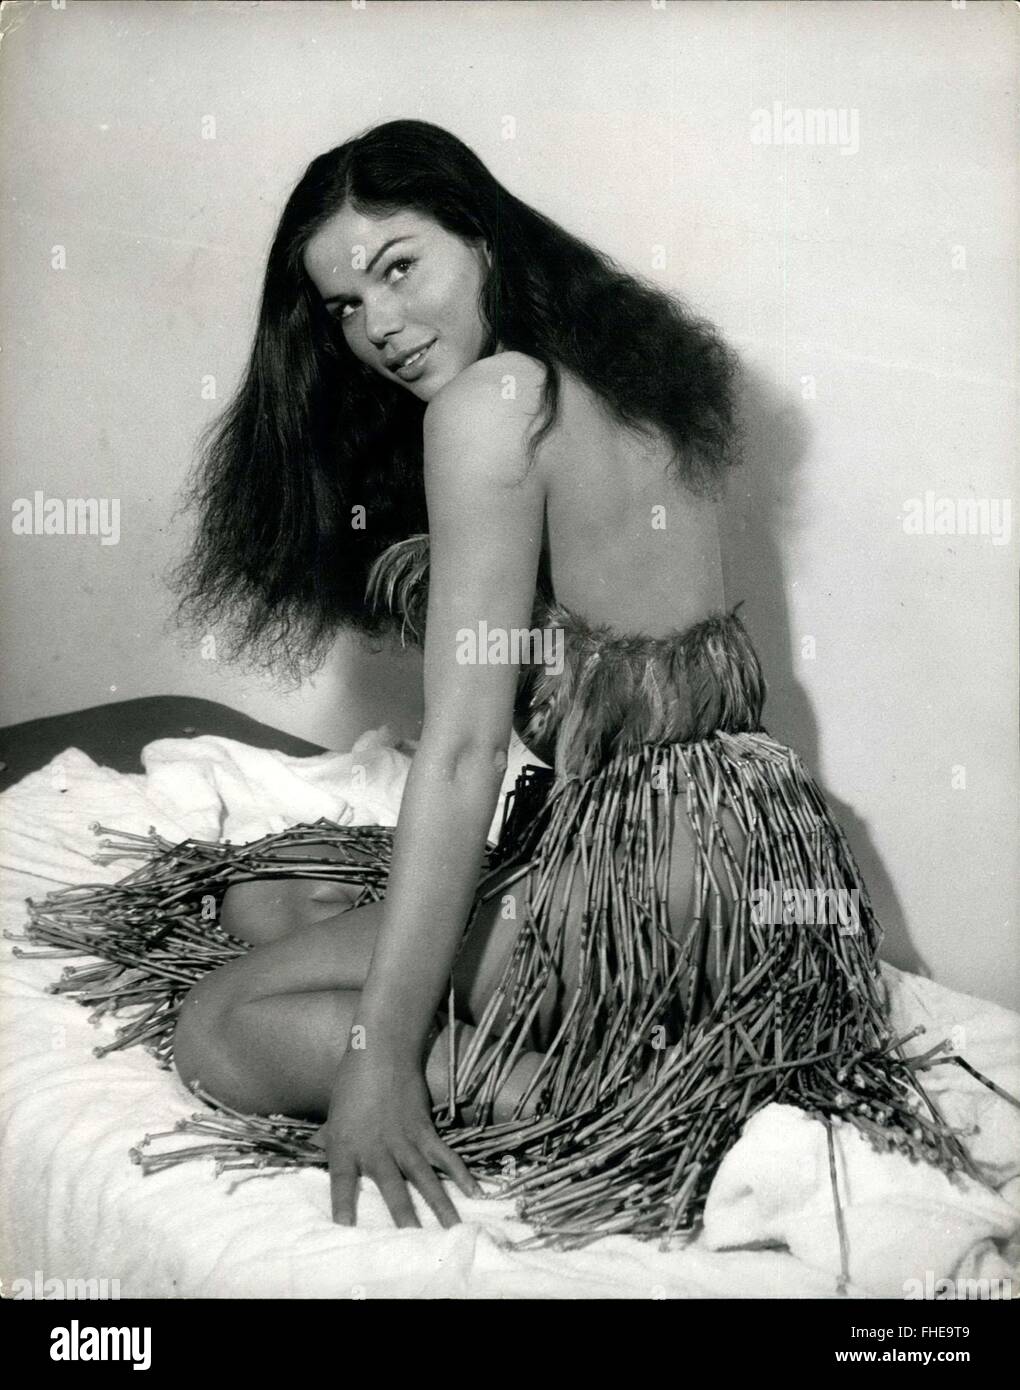 1966 - Laya Raki Stars In Epic Film Of Early Days Of New Zealand: Laya Raki, 22-year-old sensational dancer who specialises in native and oriental dancing is playing the part of the beautiful Maori girl, Moana in the new J.Arthur Rank New Zealand film ''The Seckers most of the scenes of which are being made in New Zealand. Laya is the daughter of a Cerman father and a Dutch-Javanese mother. ''The Seekers'' is the epic story of an Empire Builder of the early 19th century when the British Colonisers were settling in New Zealand. Moana is the beautiful wife of a friendly Maori Chieftain, who fall Stock Photo